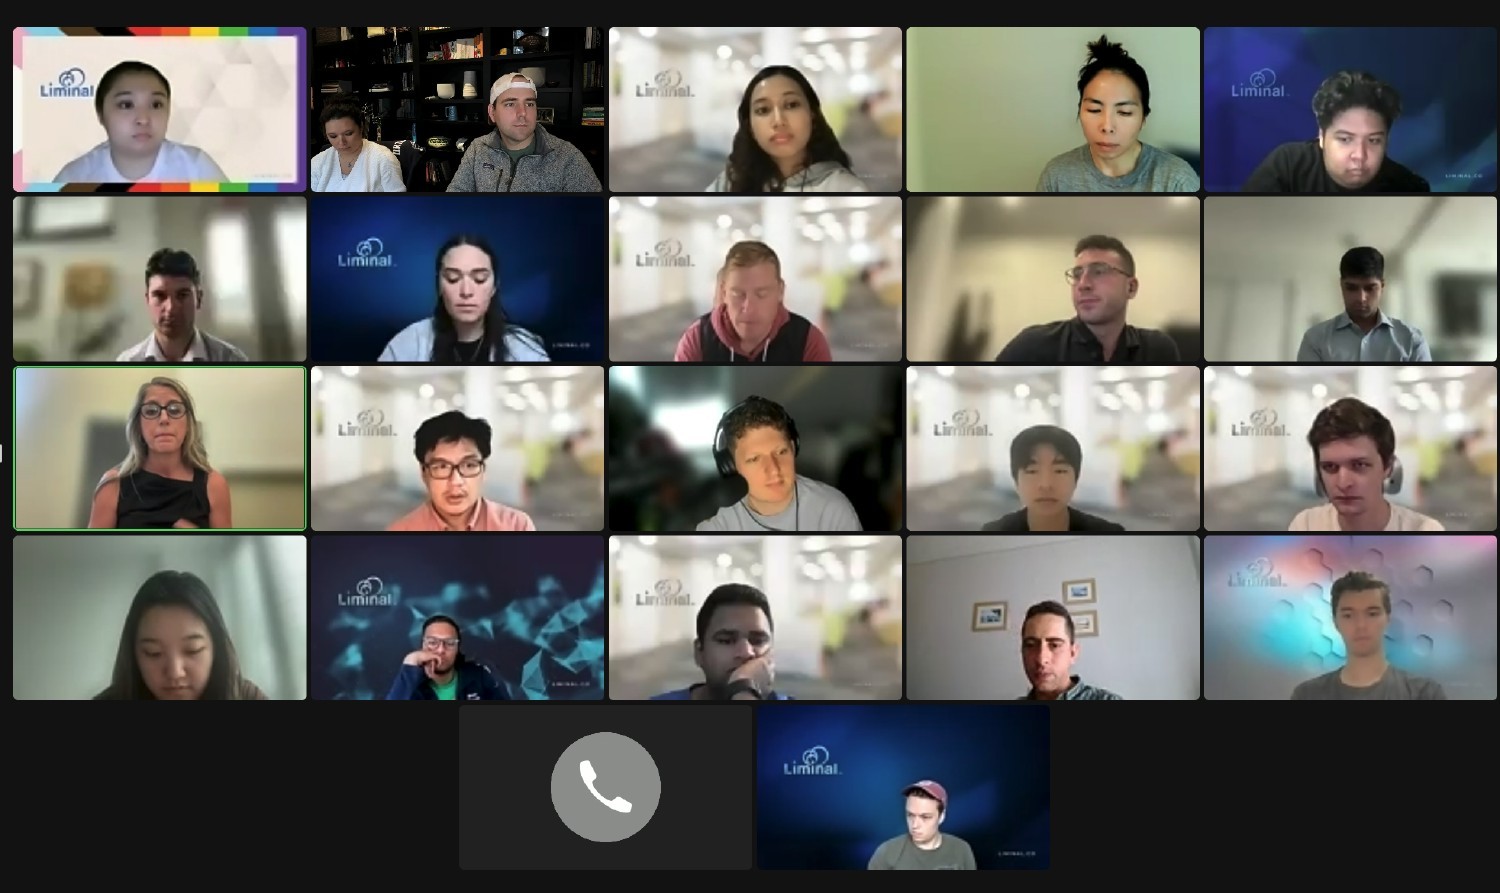 Weekly team calls represent our flexible work arrangement for our team members in the US, Portugal, and Philippines